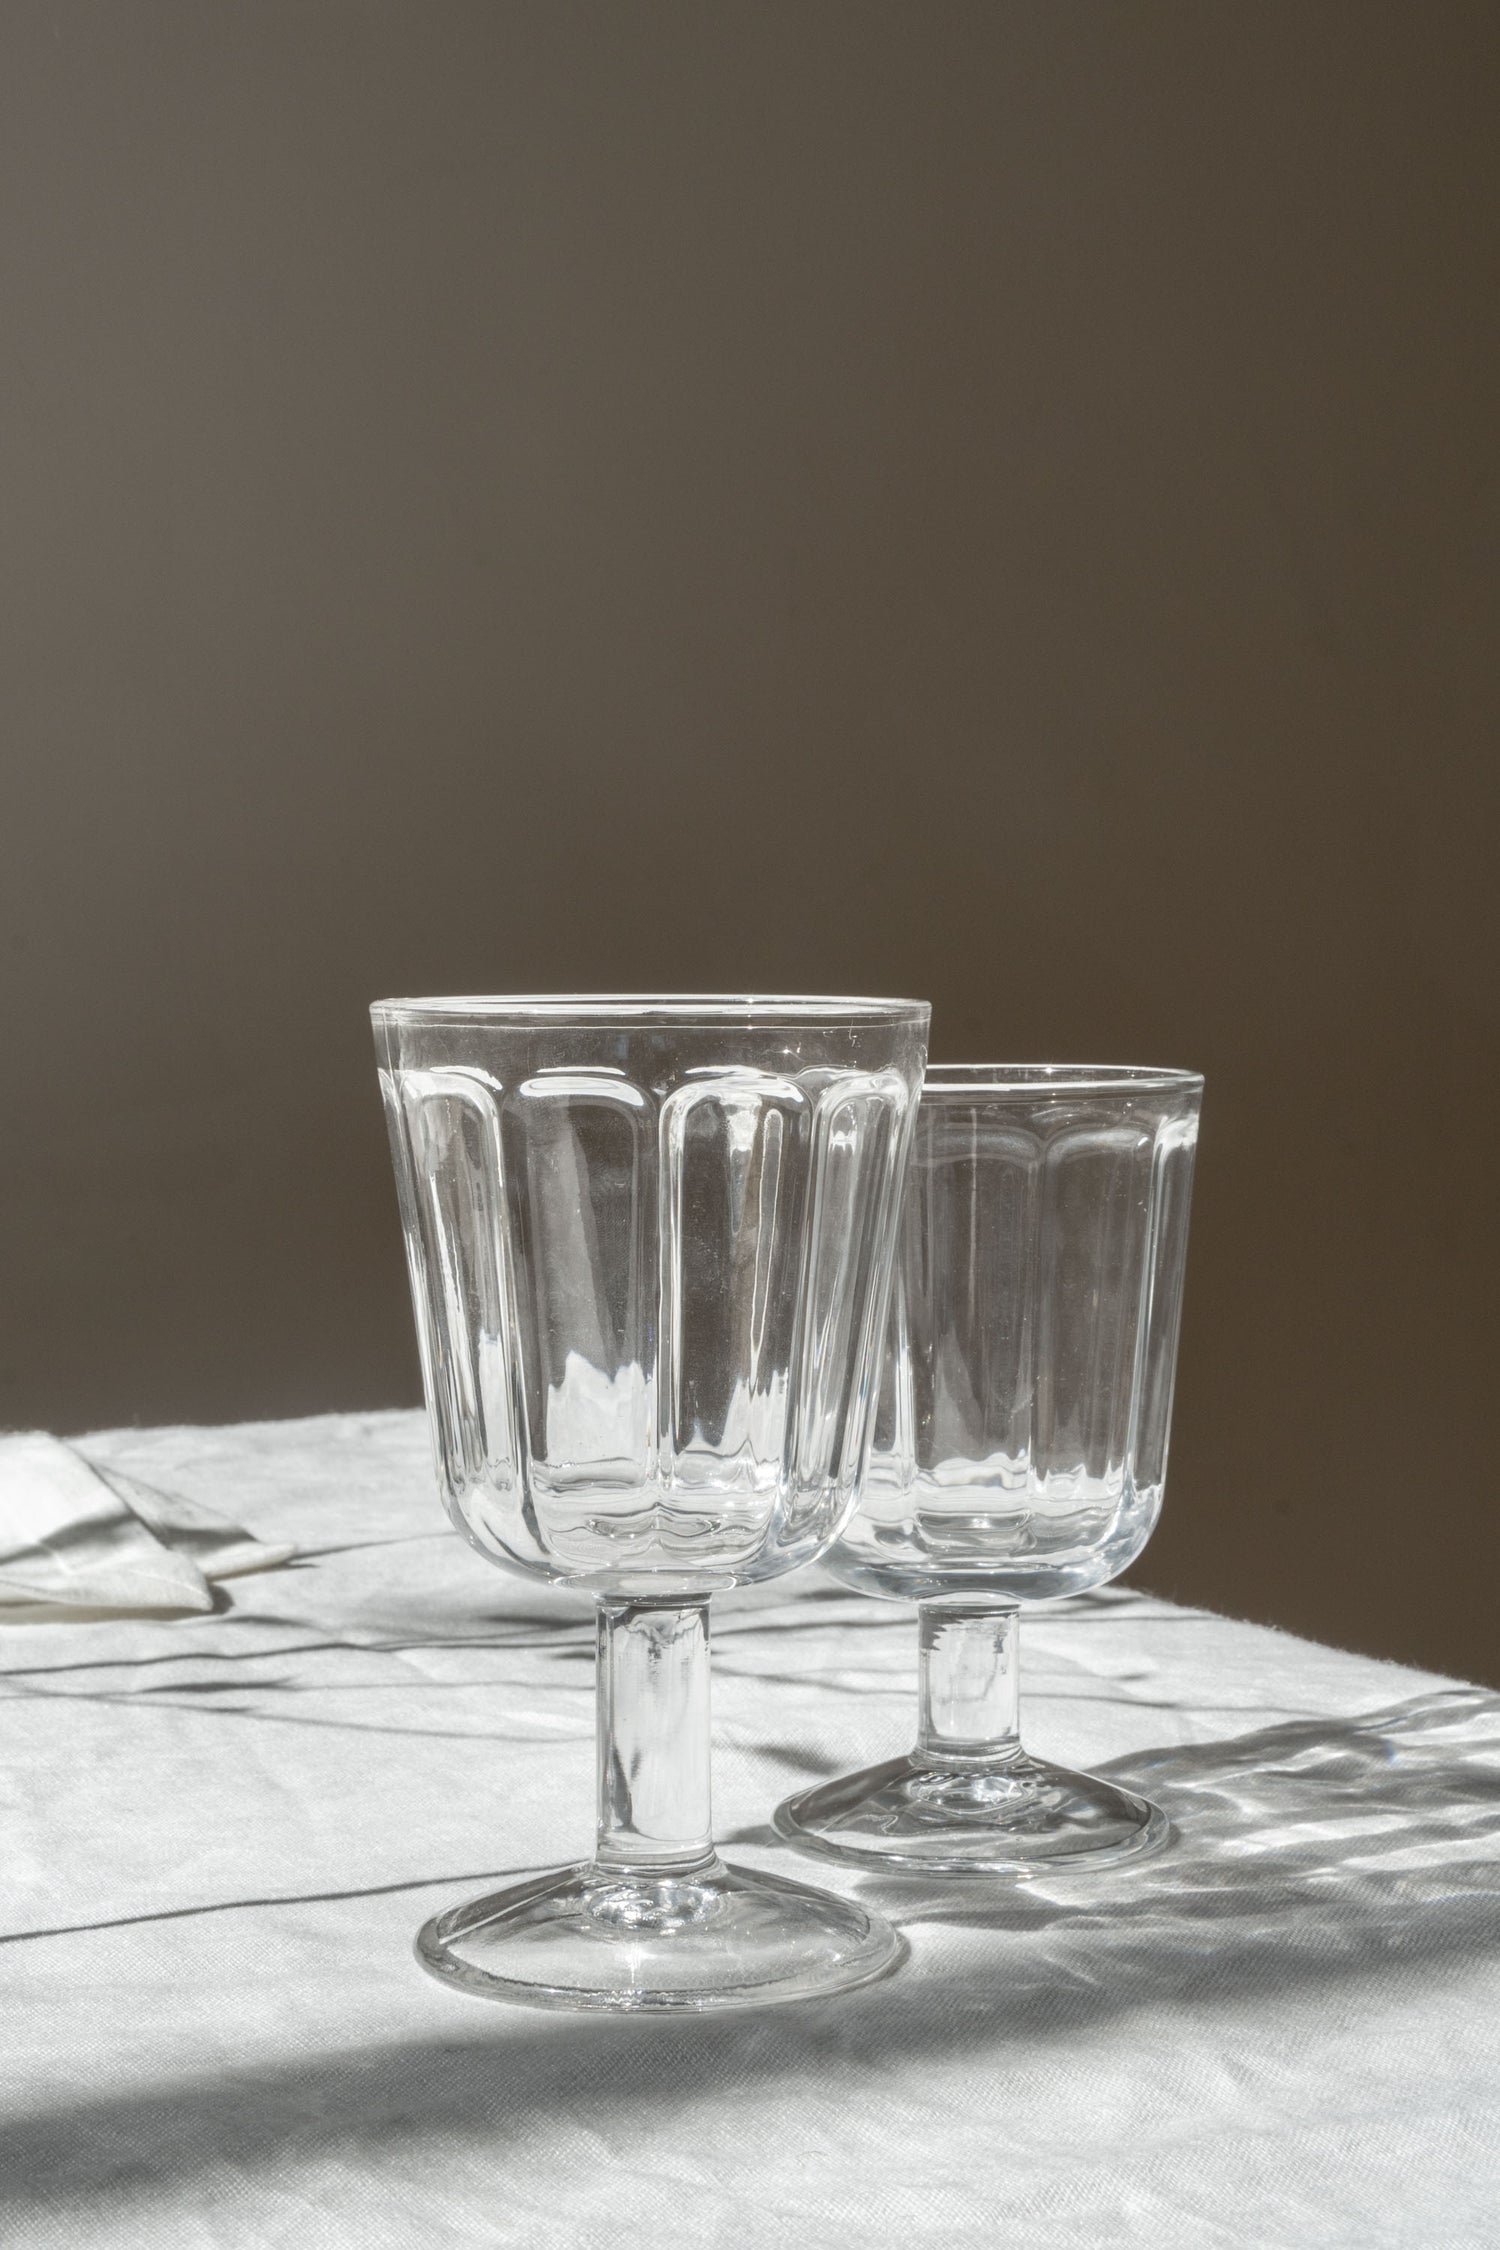 Two Surface Red Wine Glasses by Serax set on table with white linen.